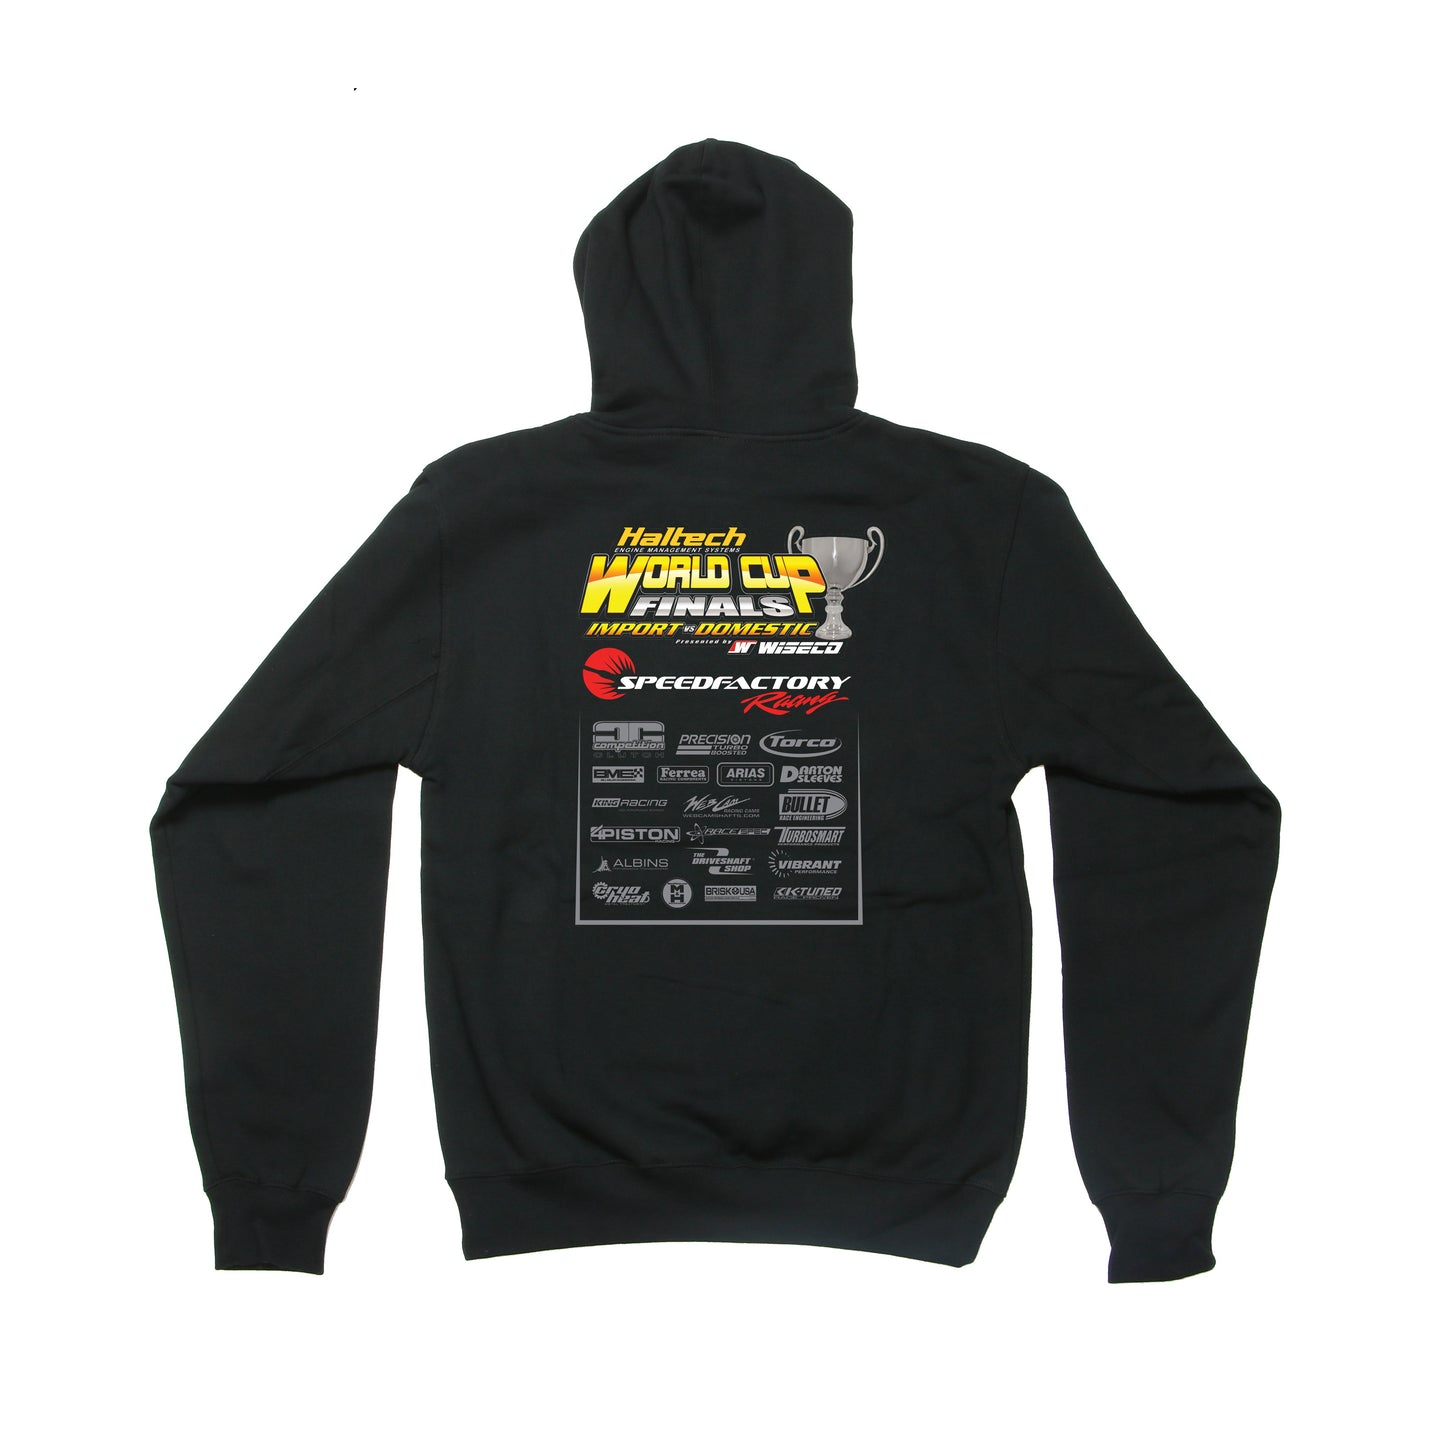 SpeedFactory Racing Limited K619 OutlAWD World Cup Finals Hoodie